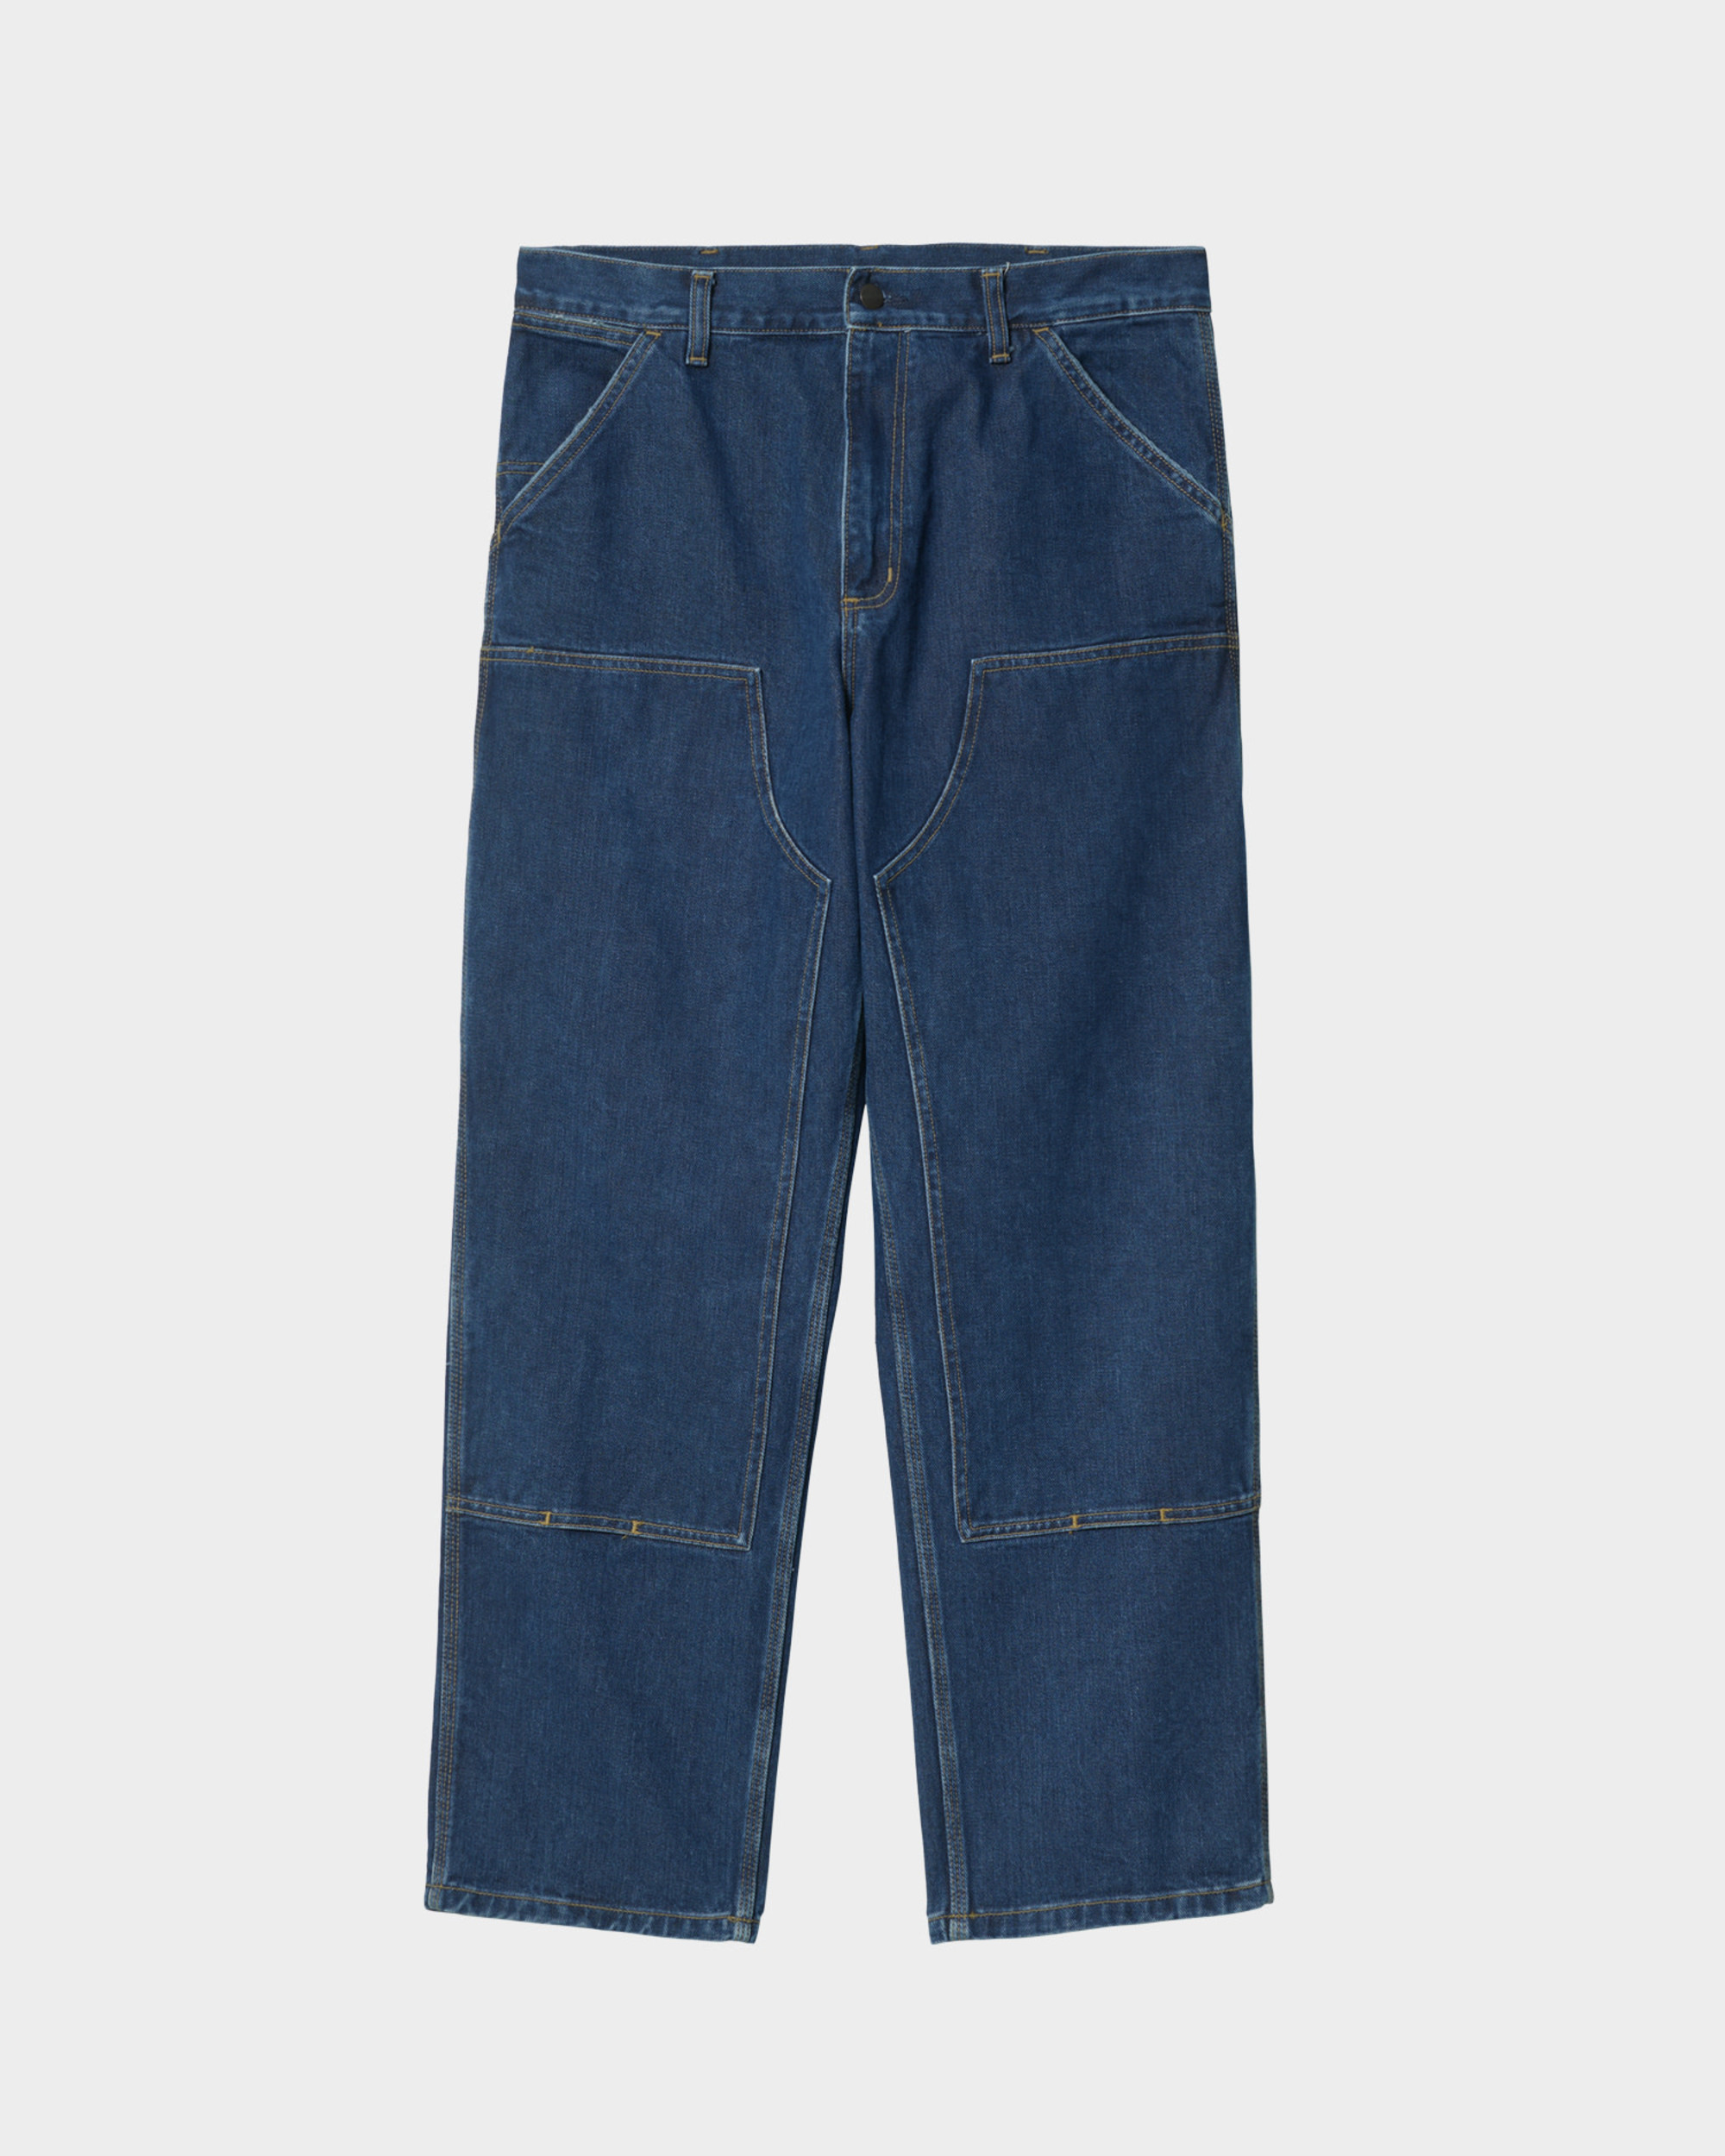 Carhartt Double Knee Pant Blue Stone Washed